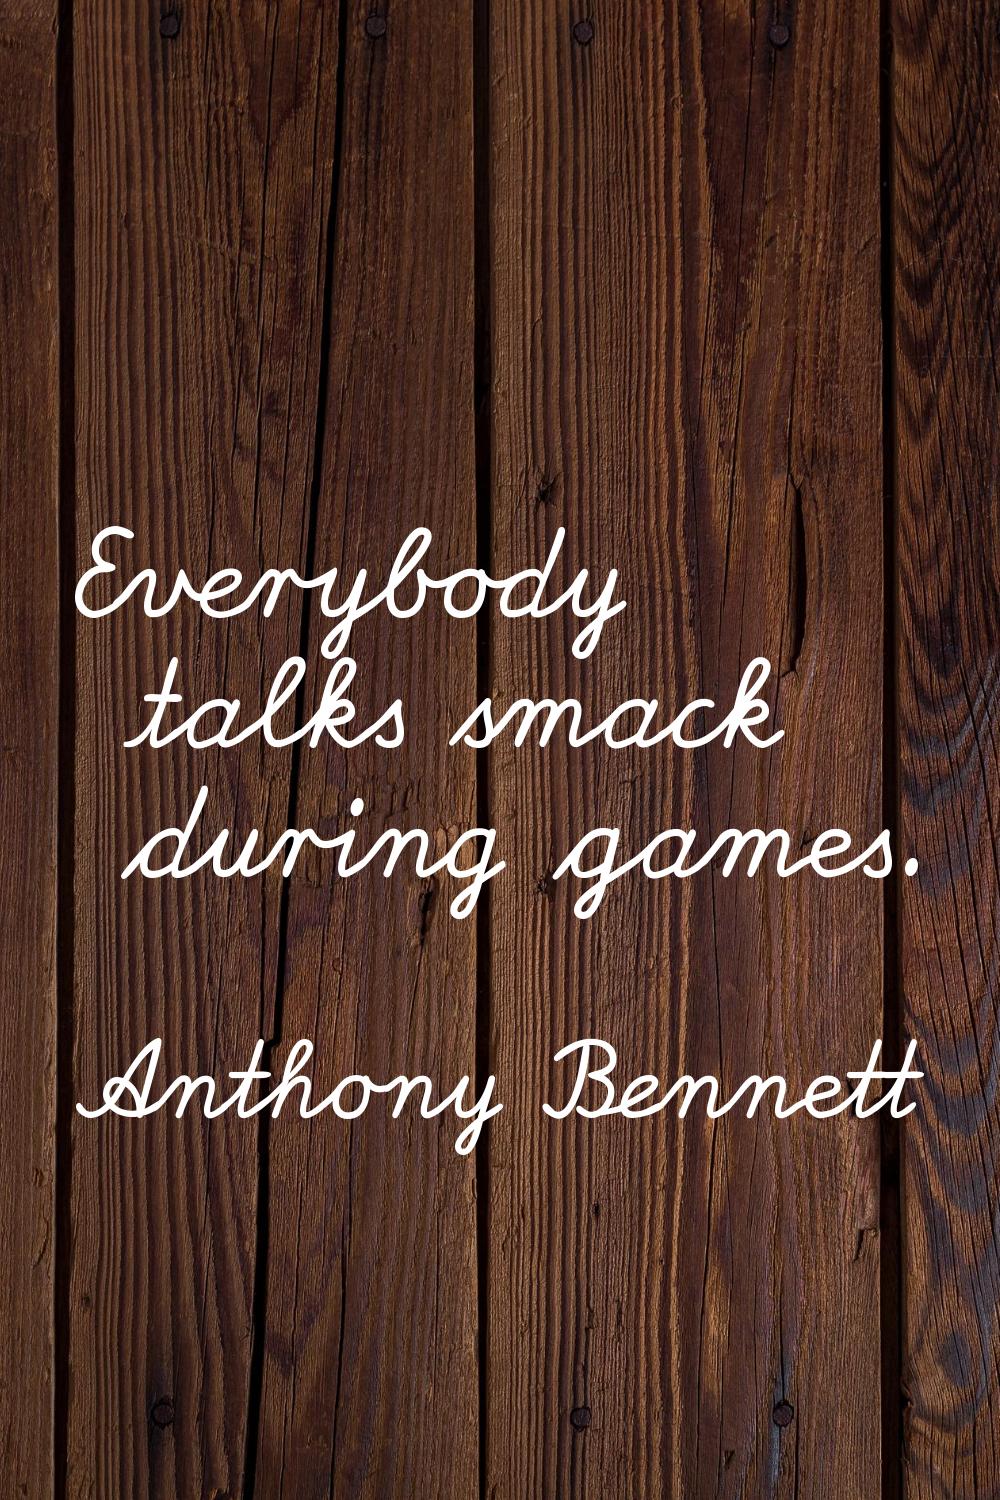 Everybody talks smack during games.